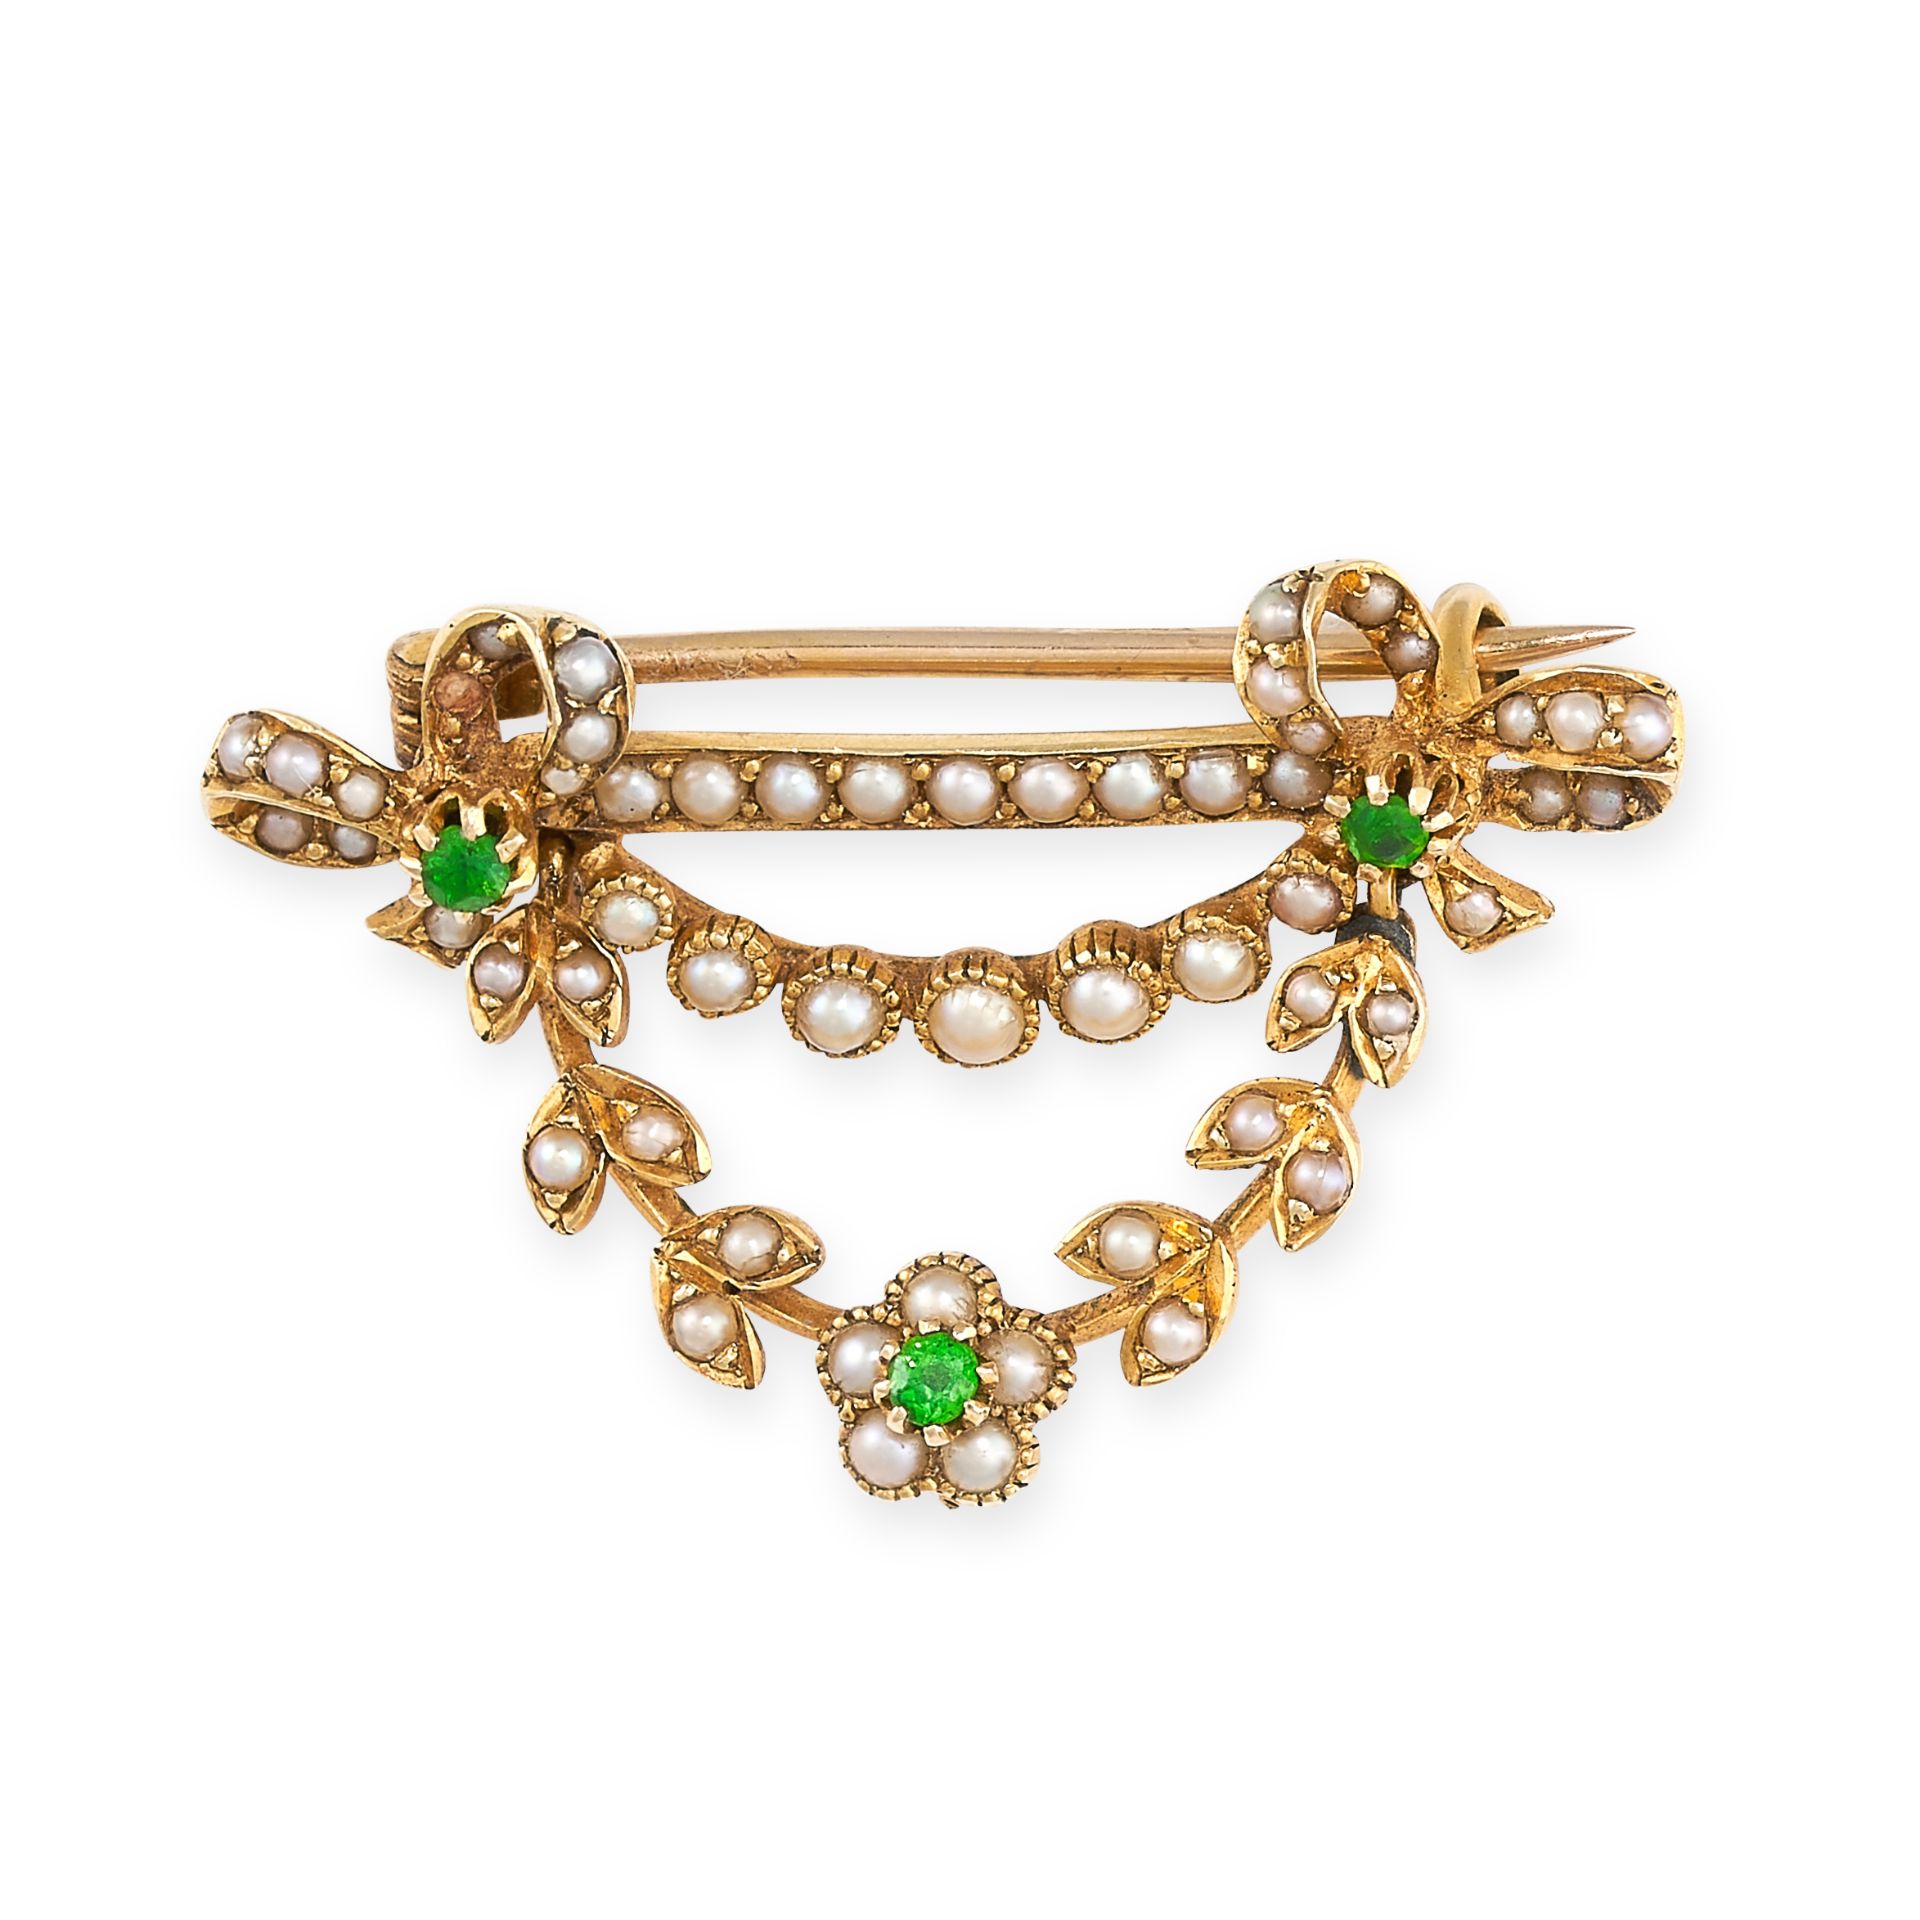 NO RESERVE - AN ANTIQUE DEMANTOID GARNET AND PEARL BROOCH in yellow gold, designed as a garland